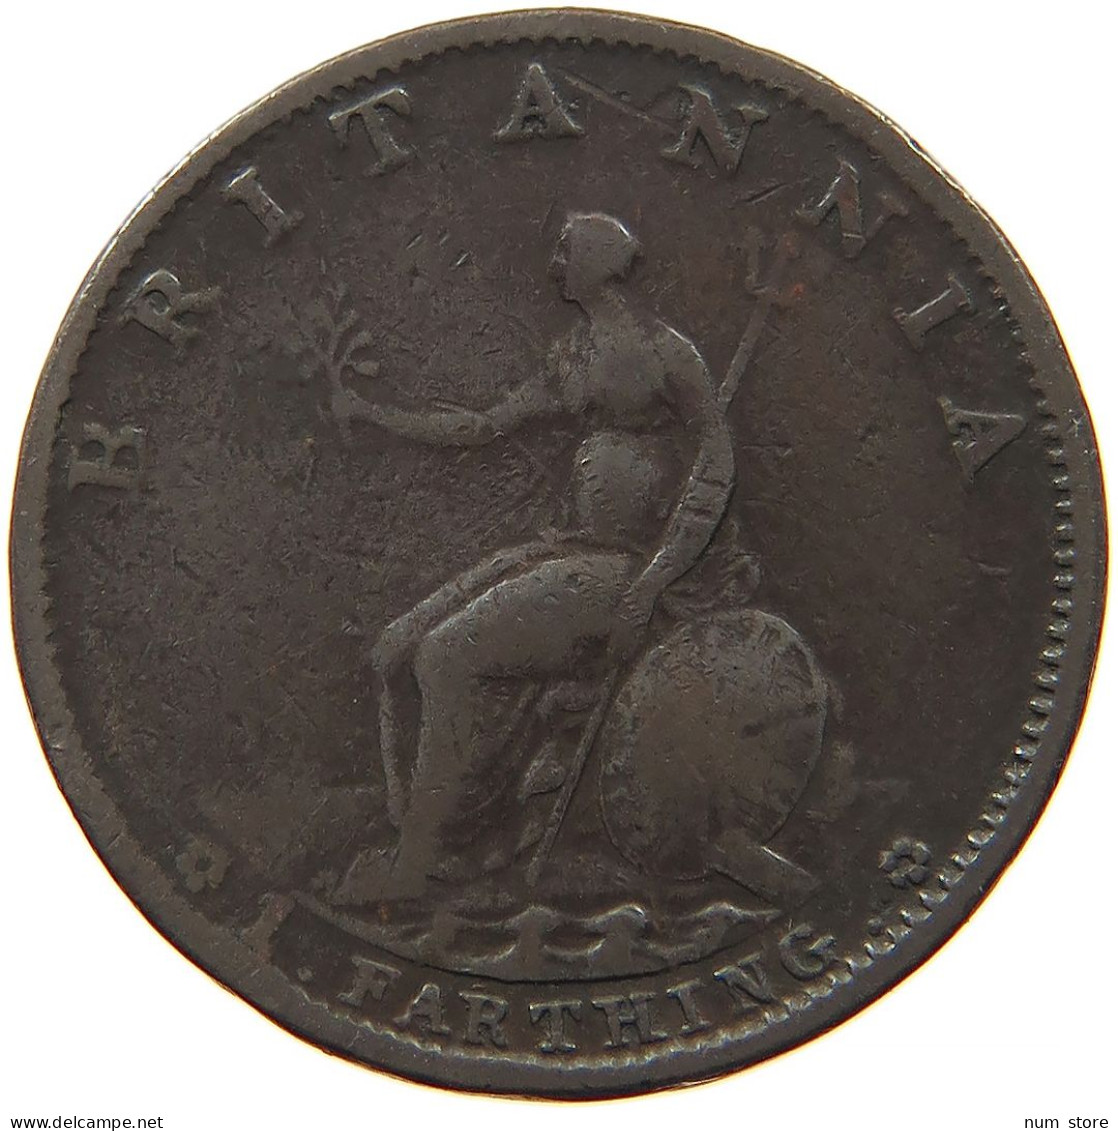 GREAT BRITAIN FARTHING 1799 #s095 0361 - A. 1 Farthing